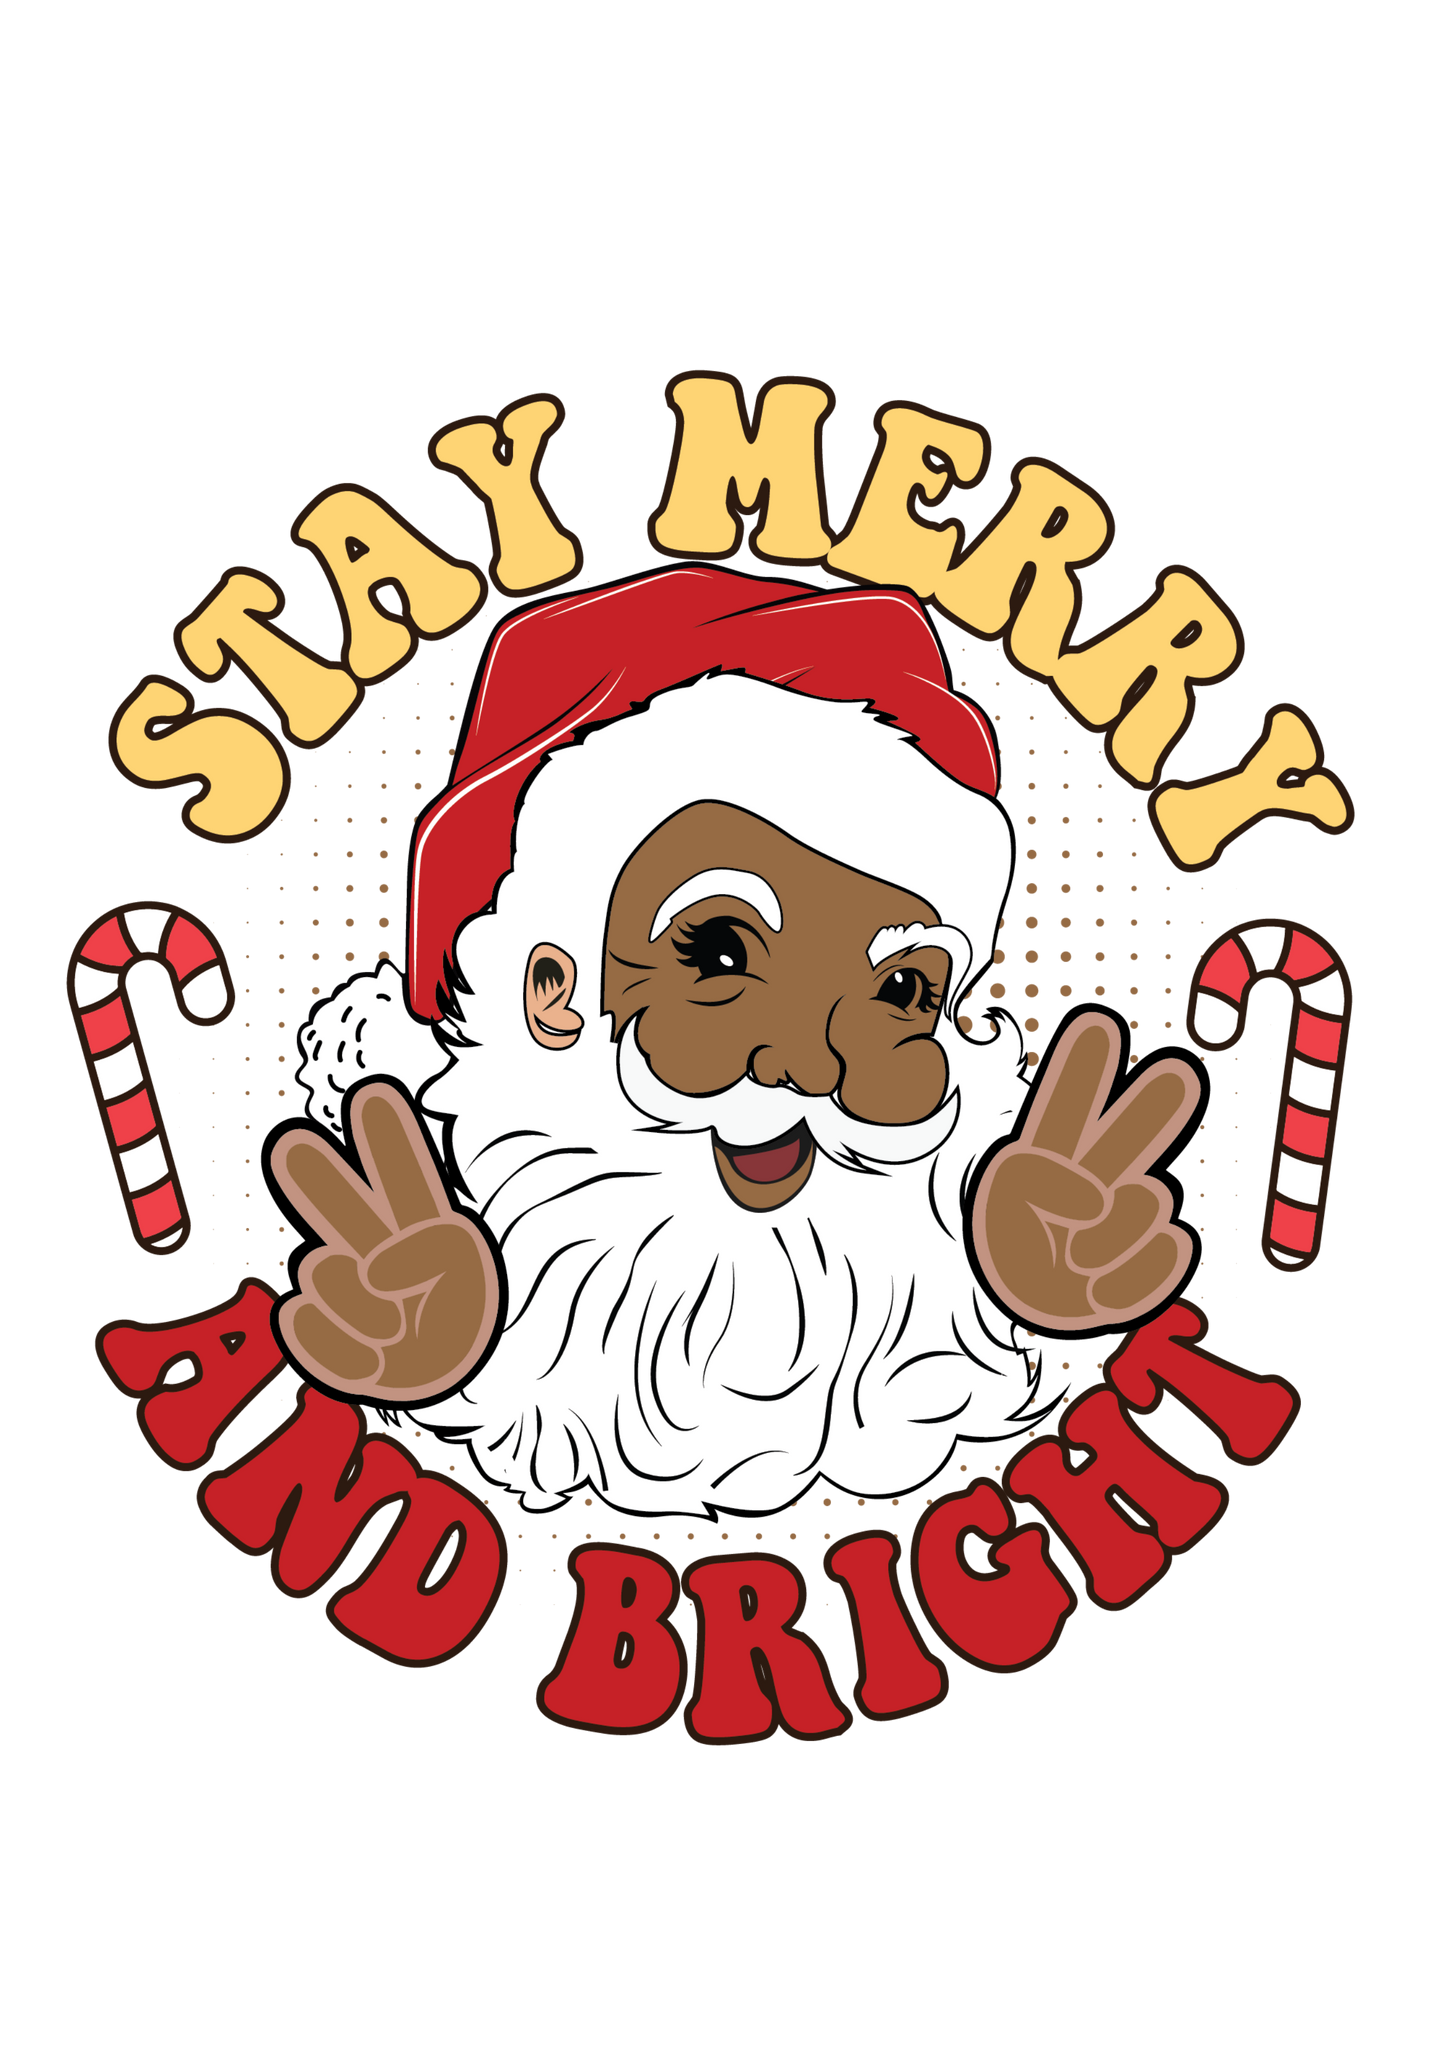 Stay Merry & Bright